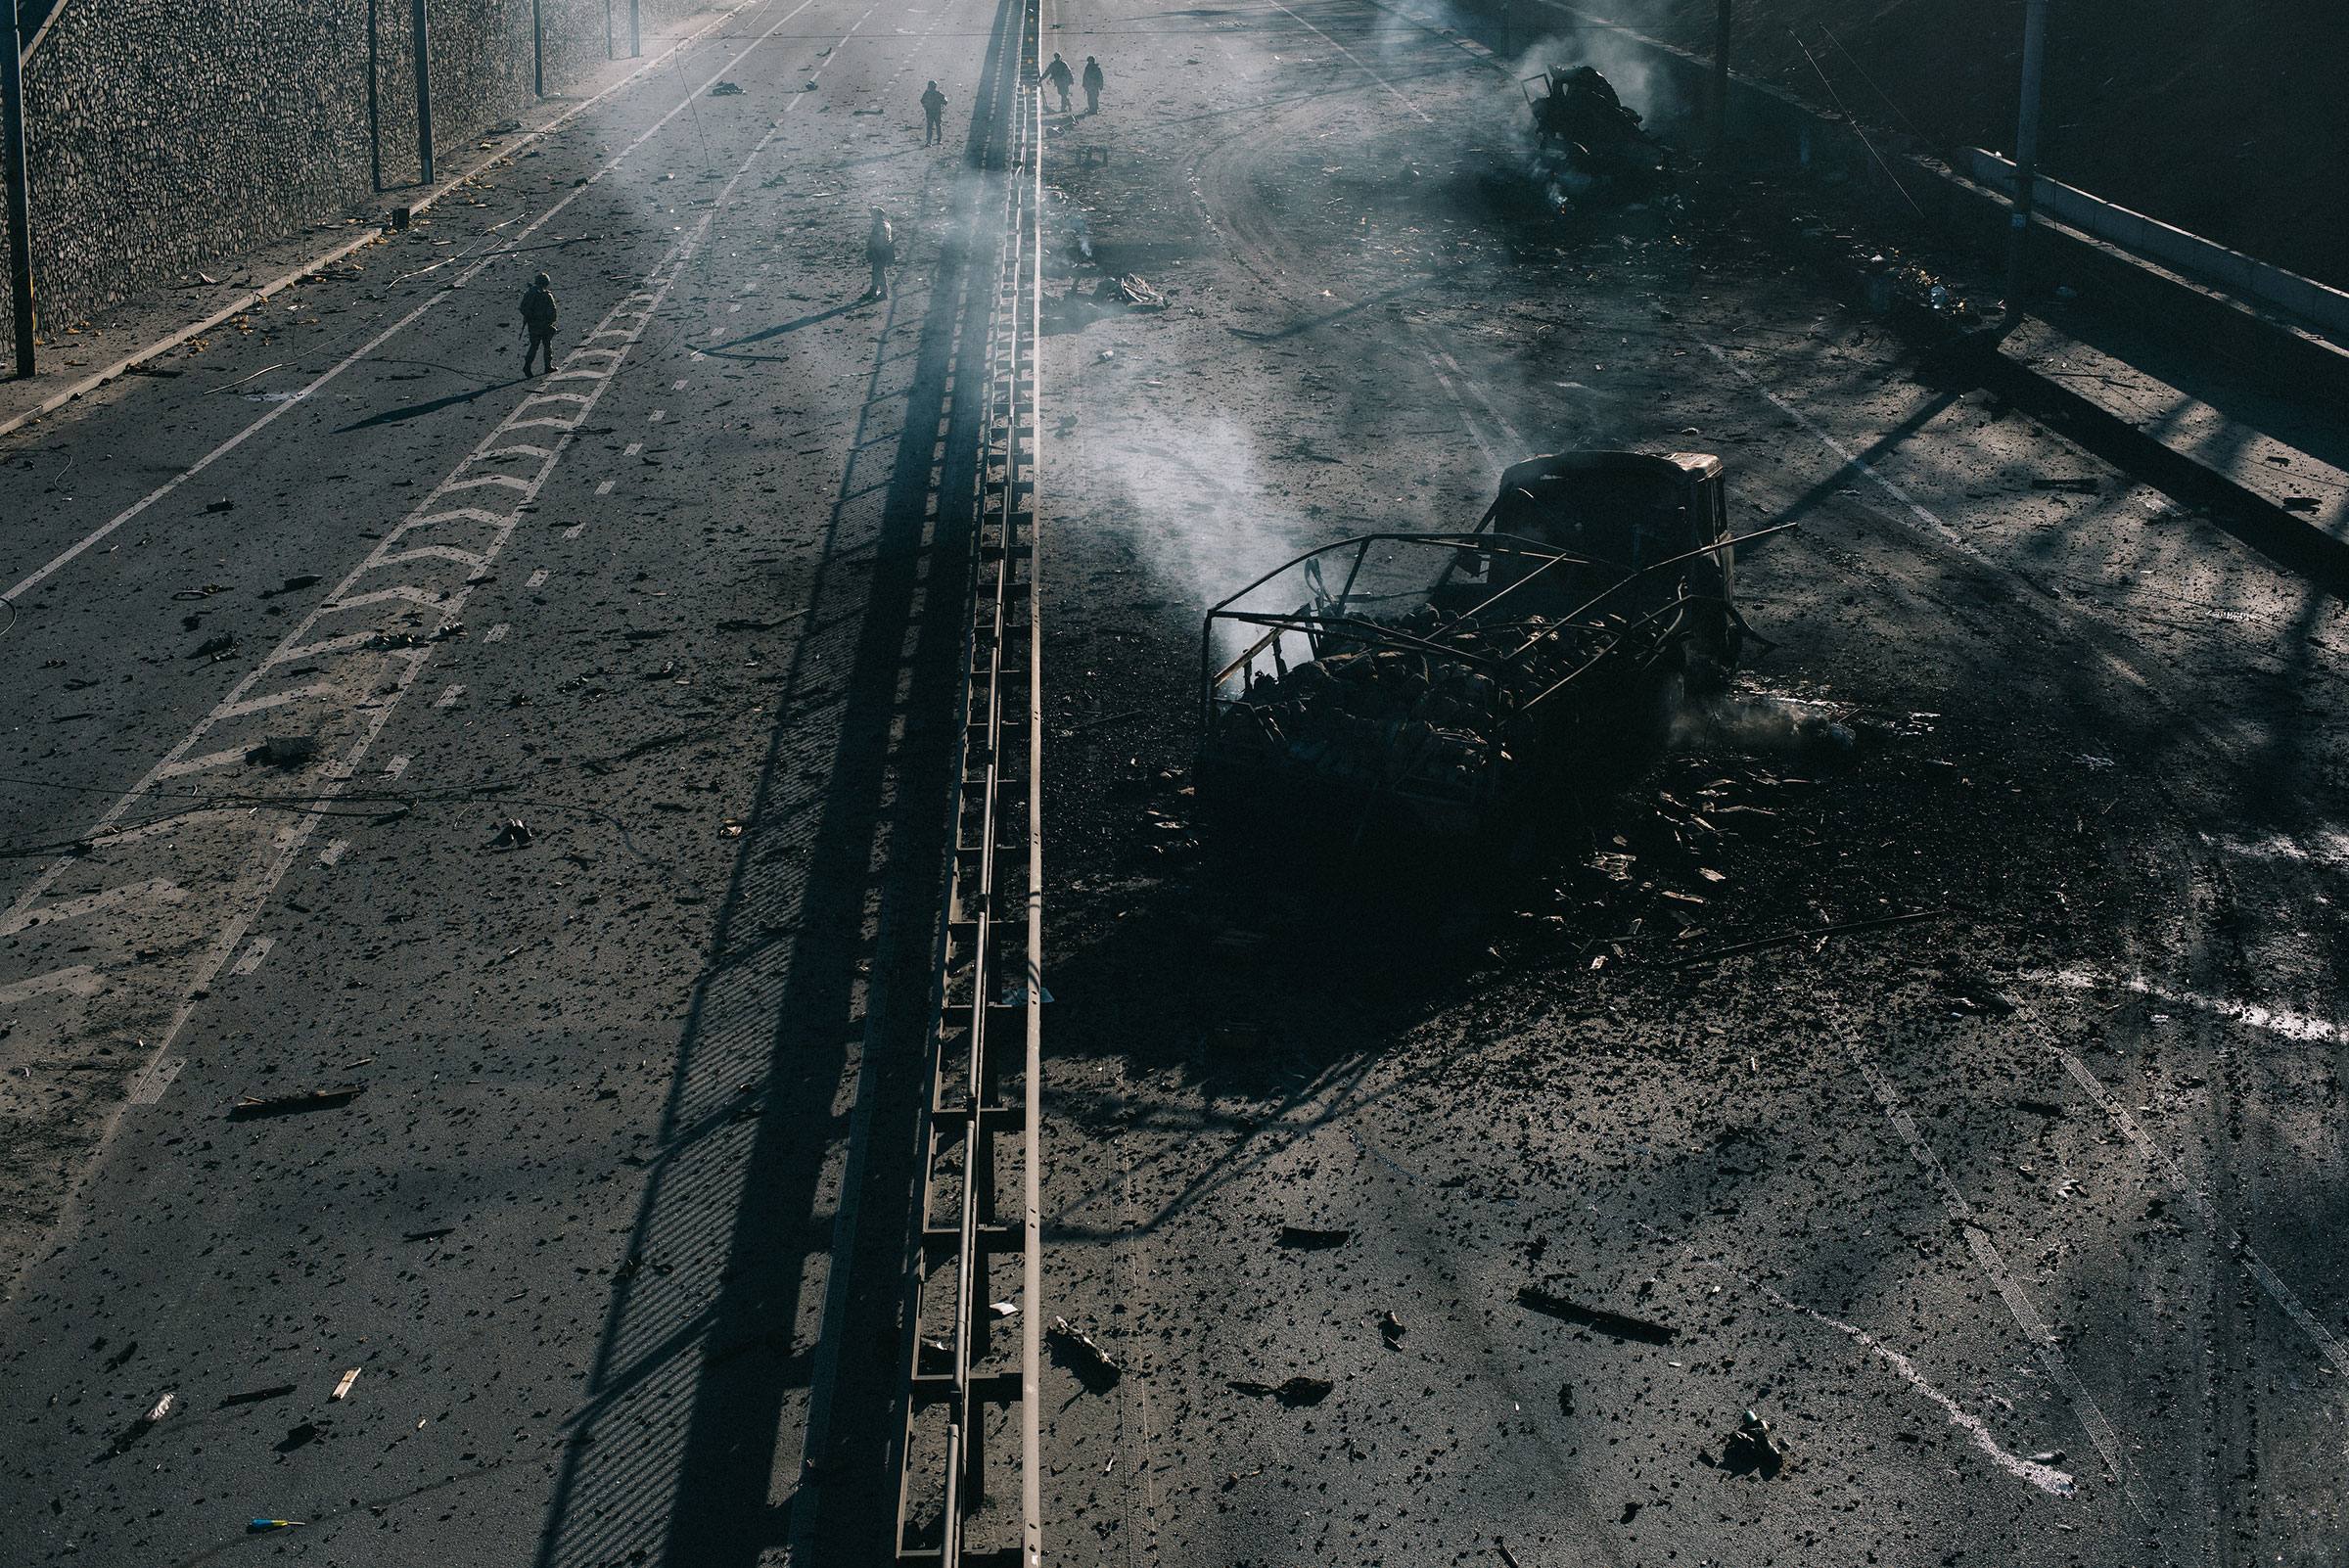 The burned-out husk of a Russian military vehicle sits on a highway leading into Kyiv. It was destroyed by Ukrainian forces as they defended the capital on the third night of the Russian invasion (Maxim Dondyuk)